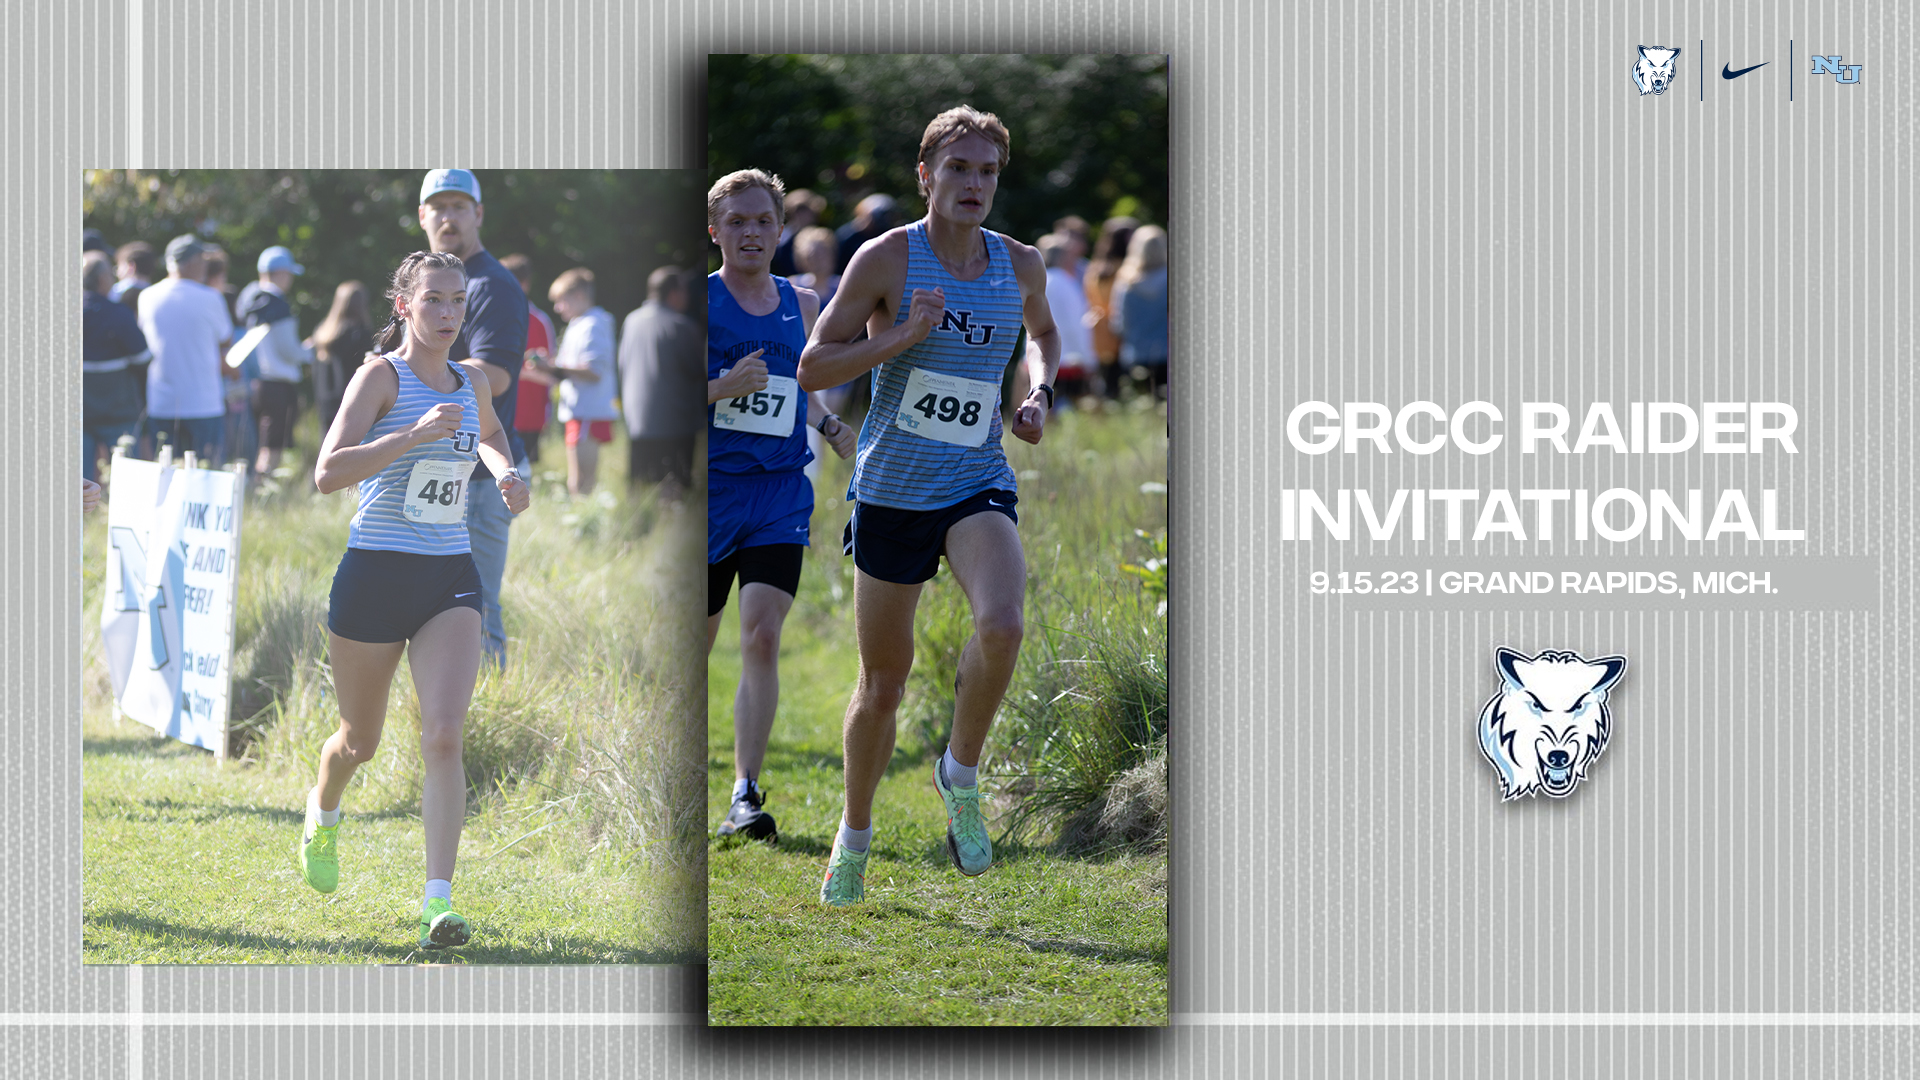 Cross Country Takes The Win At GRCC Raider Invite